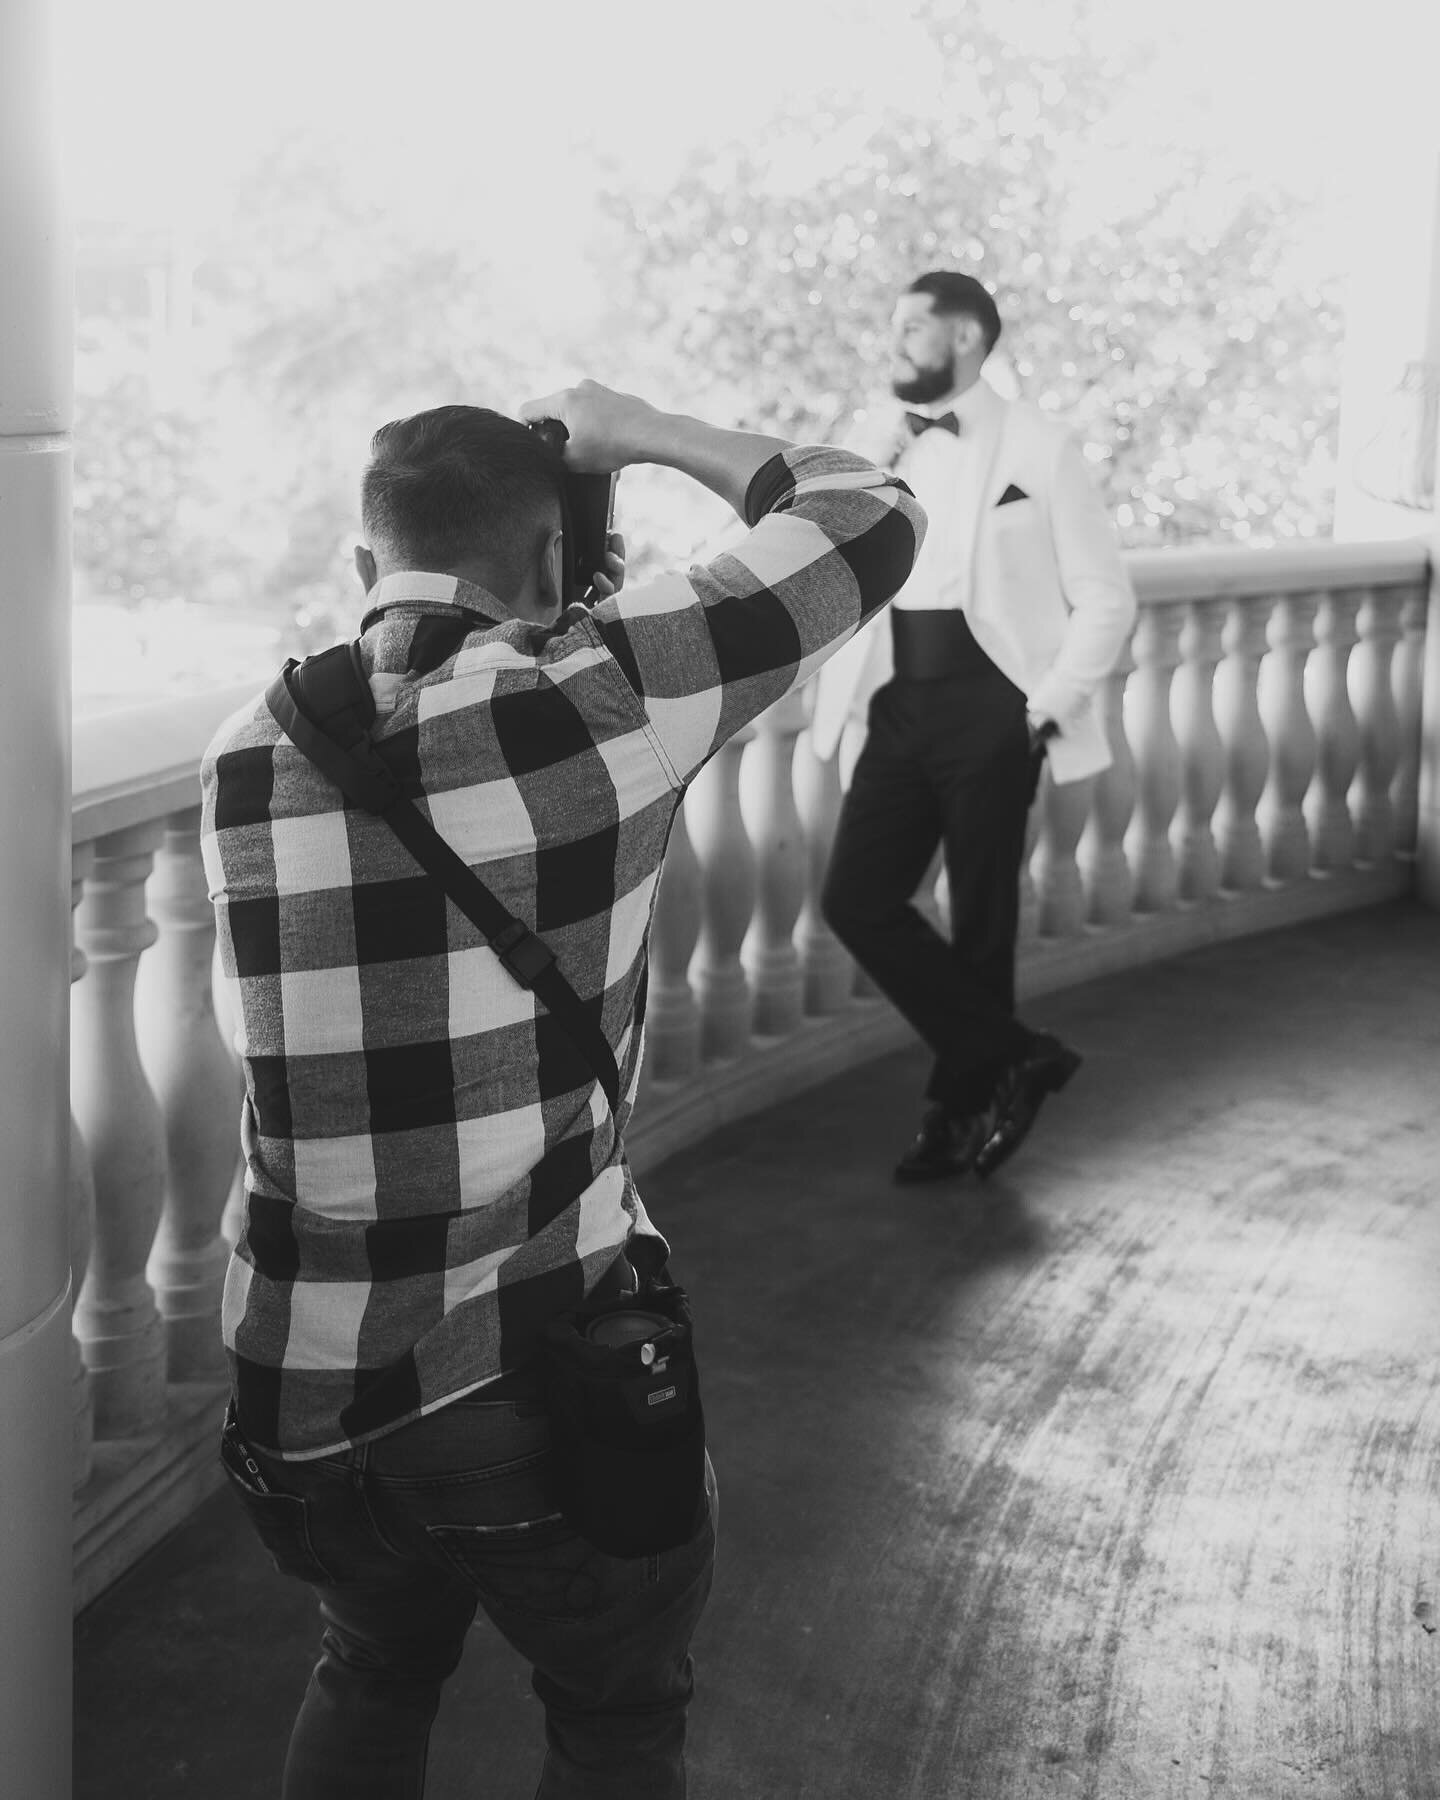 I&rsquo;ve been doing this thing for 10 years now... What a journey! 

Shoutout to @lalo.vtec for catching some of these BTS photos even though he was busy doing his groomsman thing.